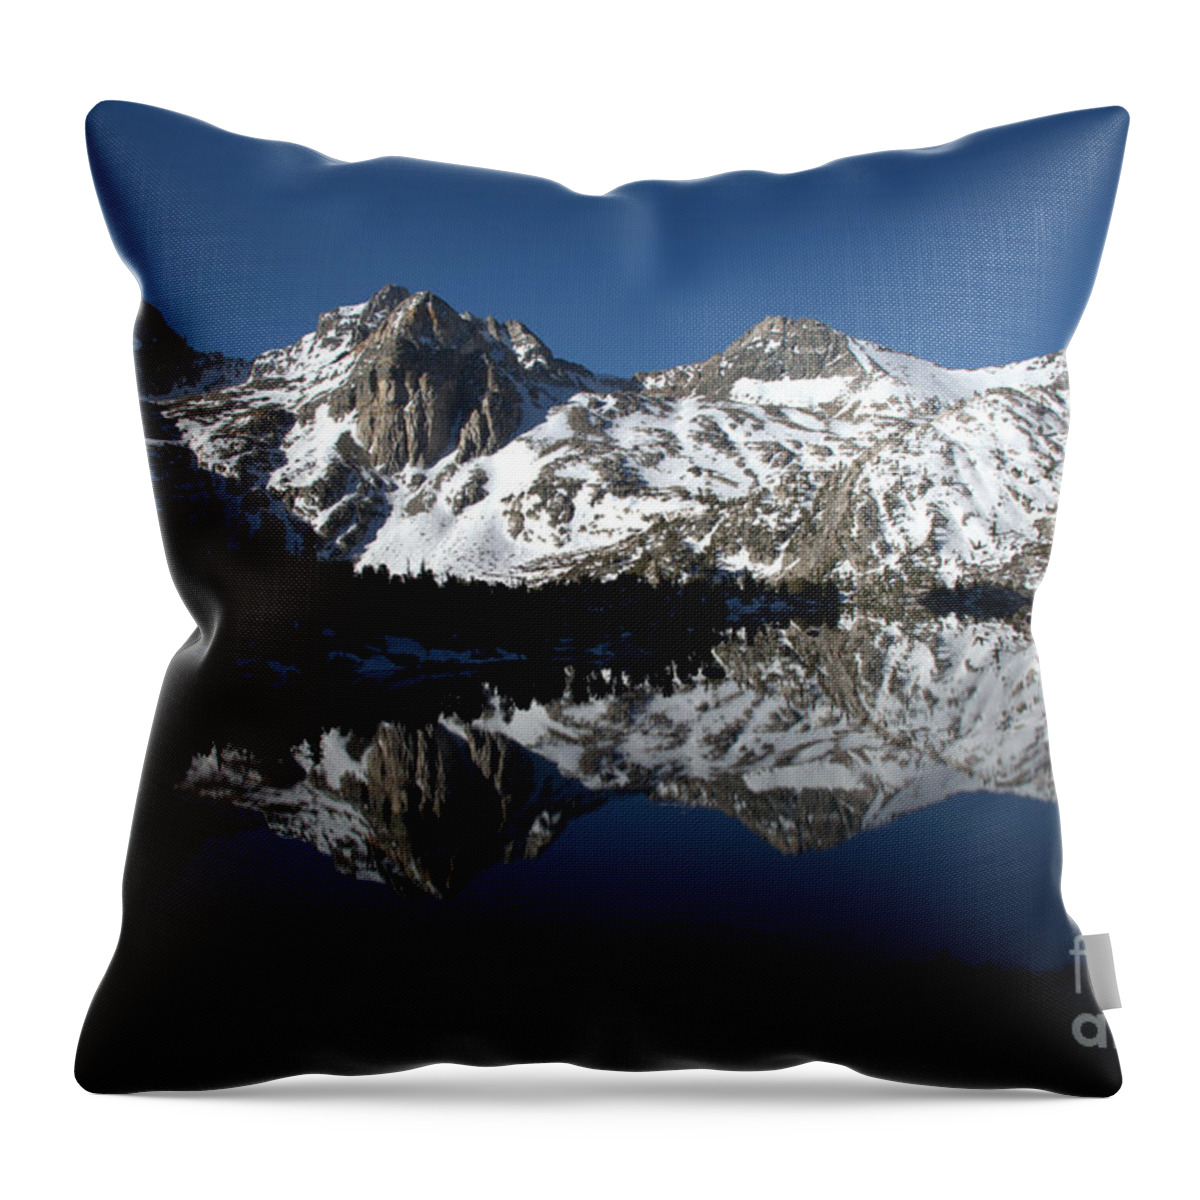 Water Throw Pillow featuring the photograph High Sierra Mountain Reflections 1 by Jane Axman